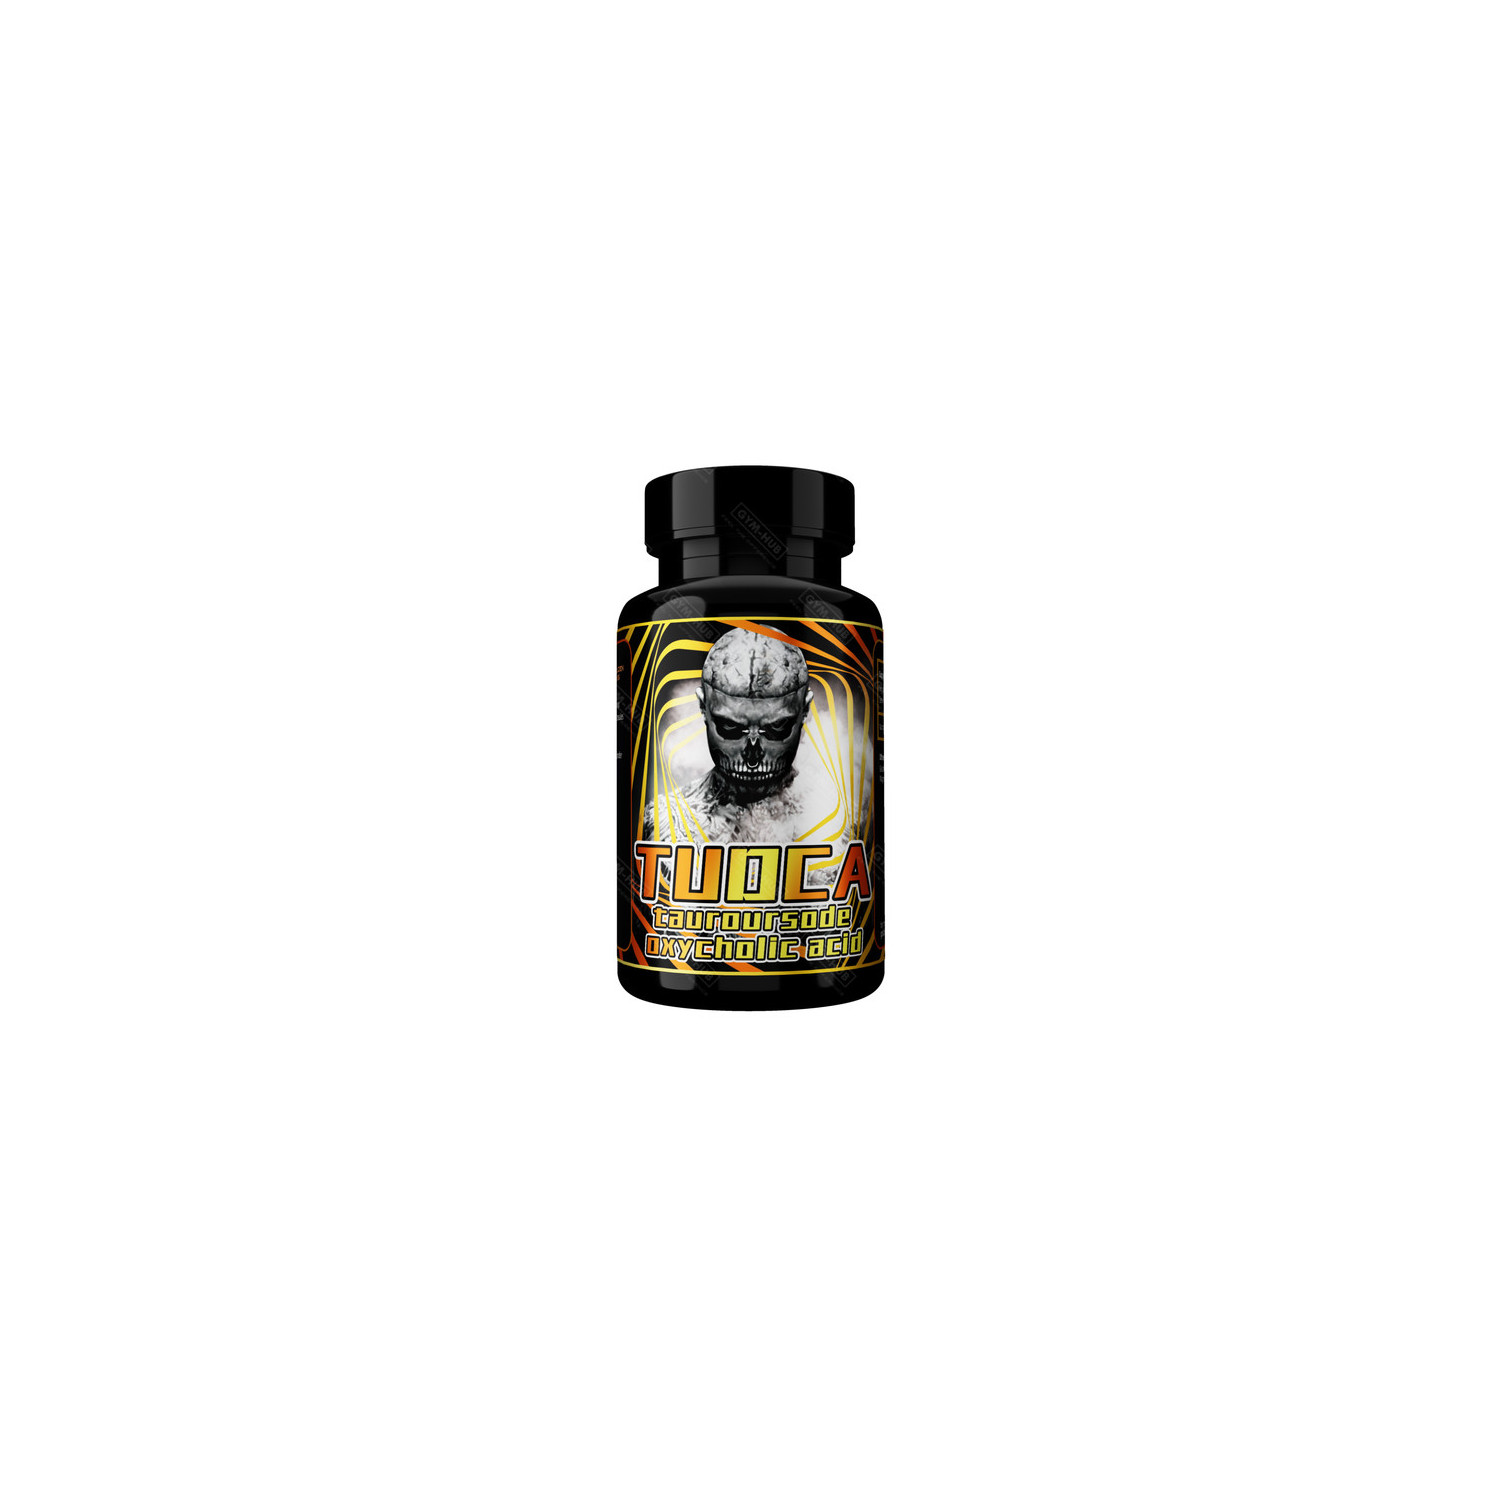 Golden Labs TUDCA 250mg 90 capsules is an effective protection for your liver.